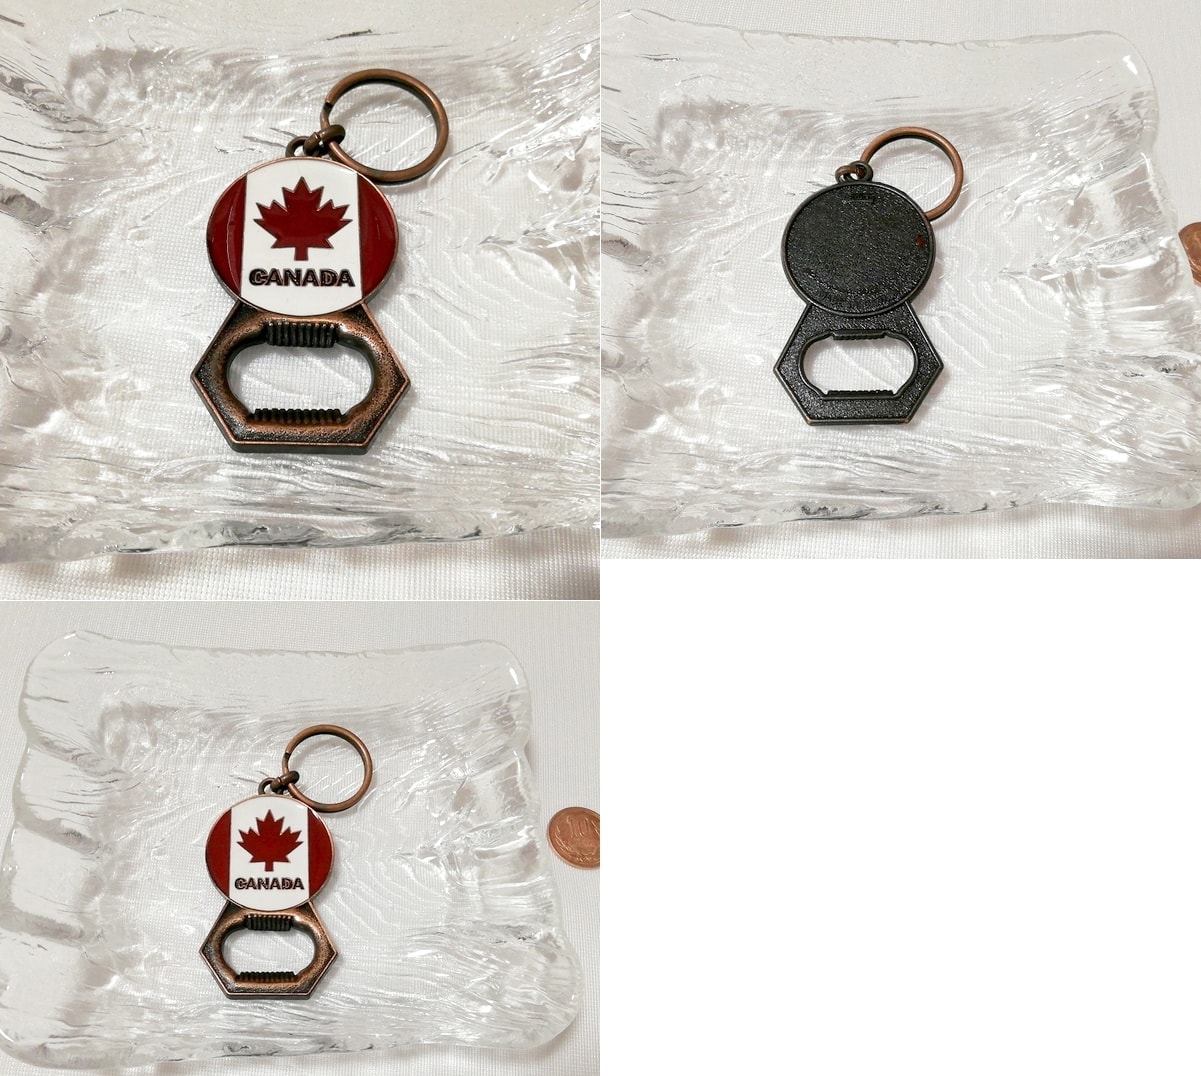 Canada canadian flag keychain jewelry accessories, miscellaneous goods, key ring, general